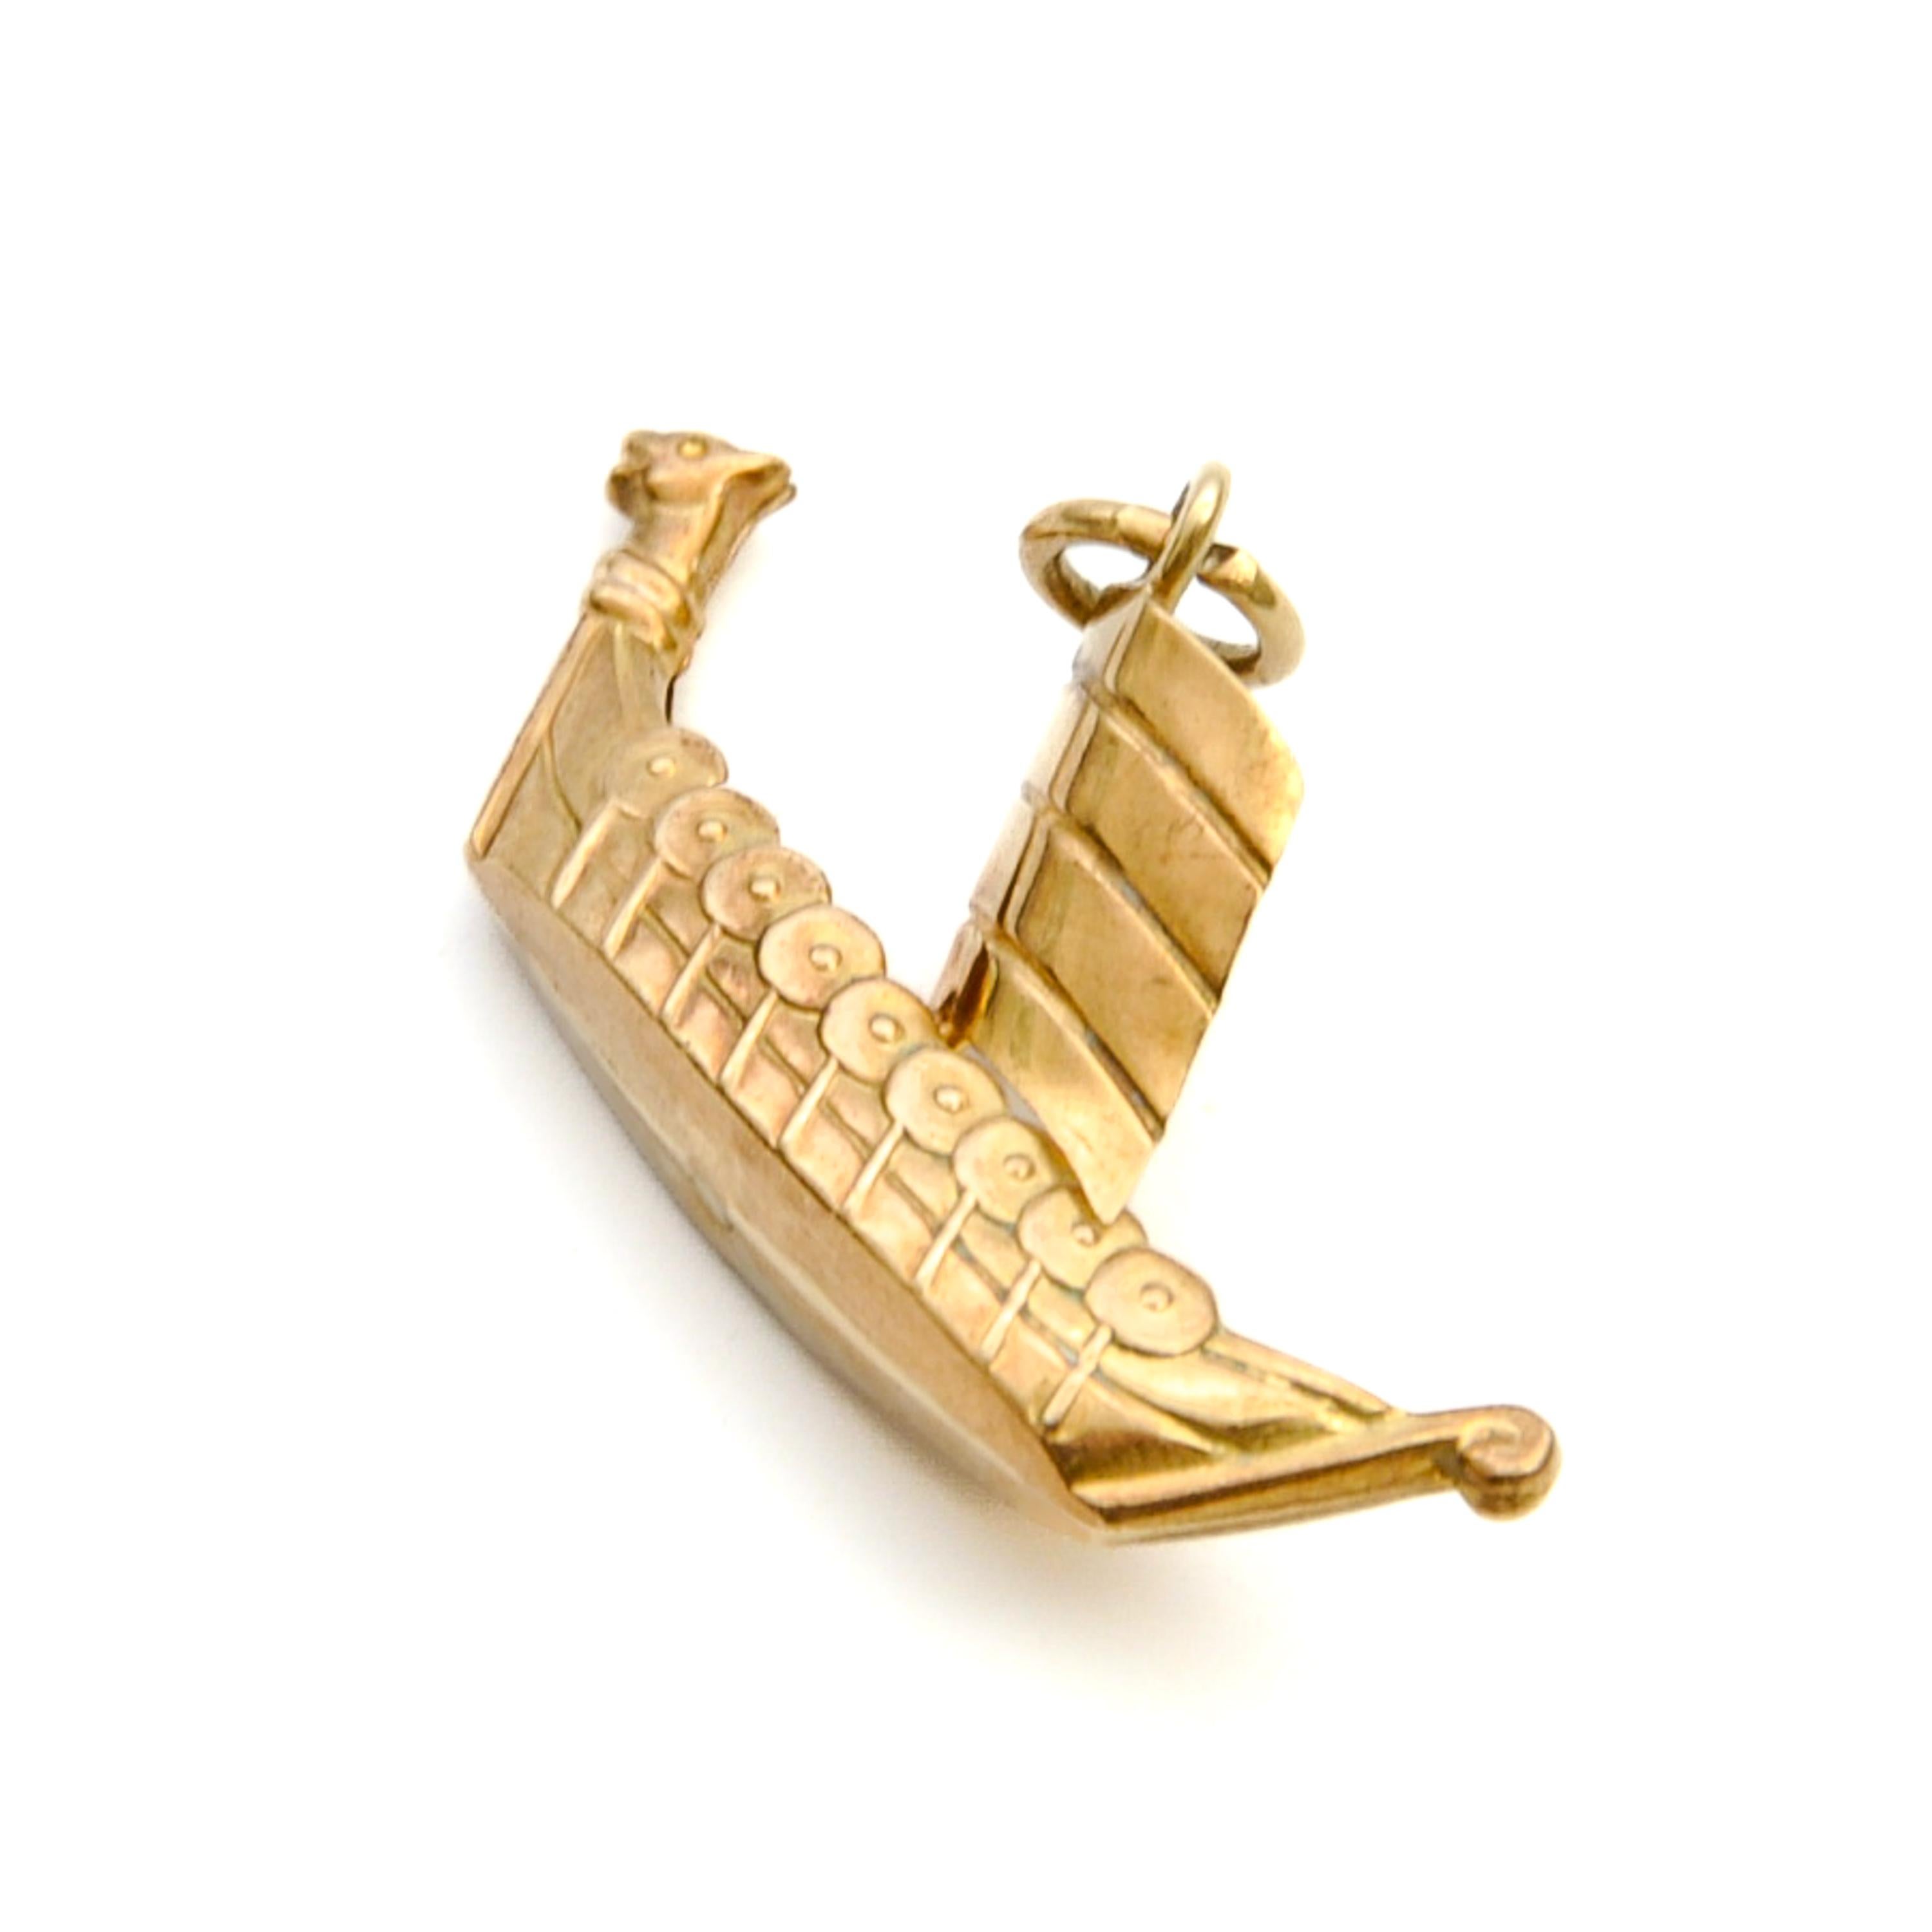 Vintage 9K Gold Viking Ship Charm Pendant In Good Condition For Sale In Rotterdam, NL